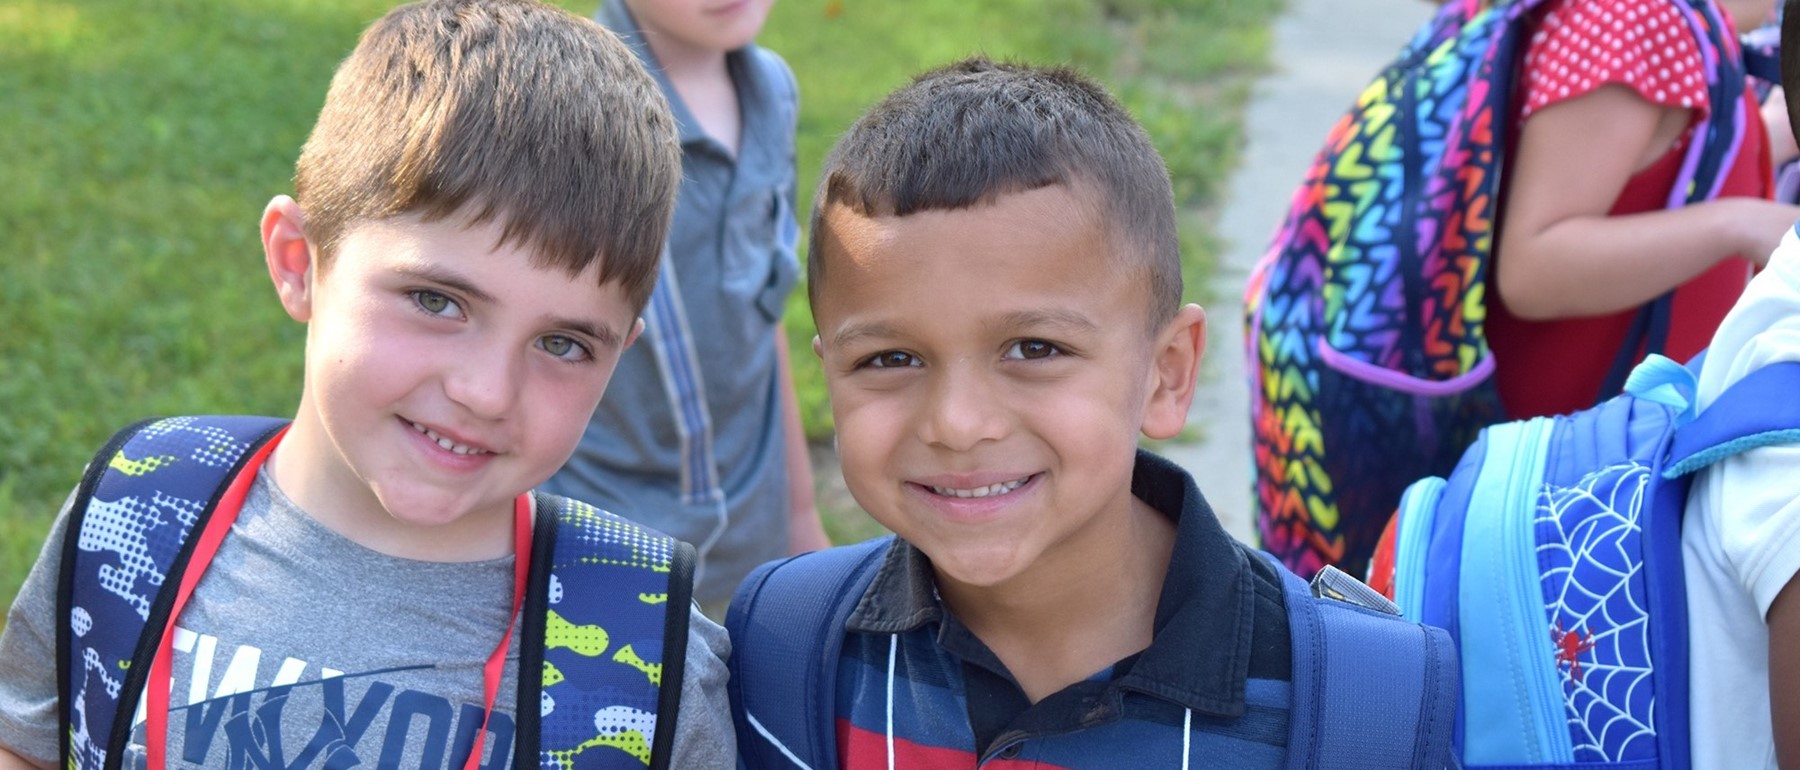 Two Vestal Hills Elementary students smile for the camera after getting off the school bus on the first day of school.